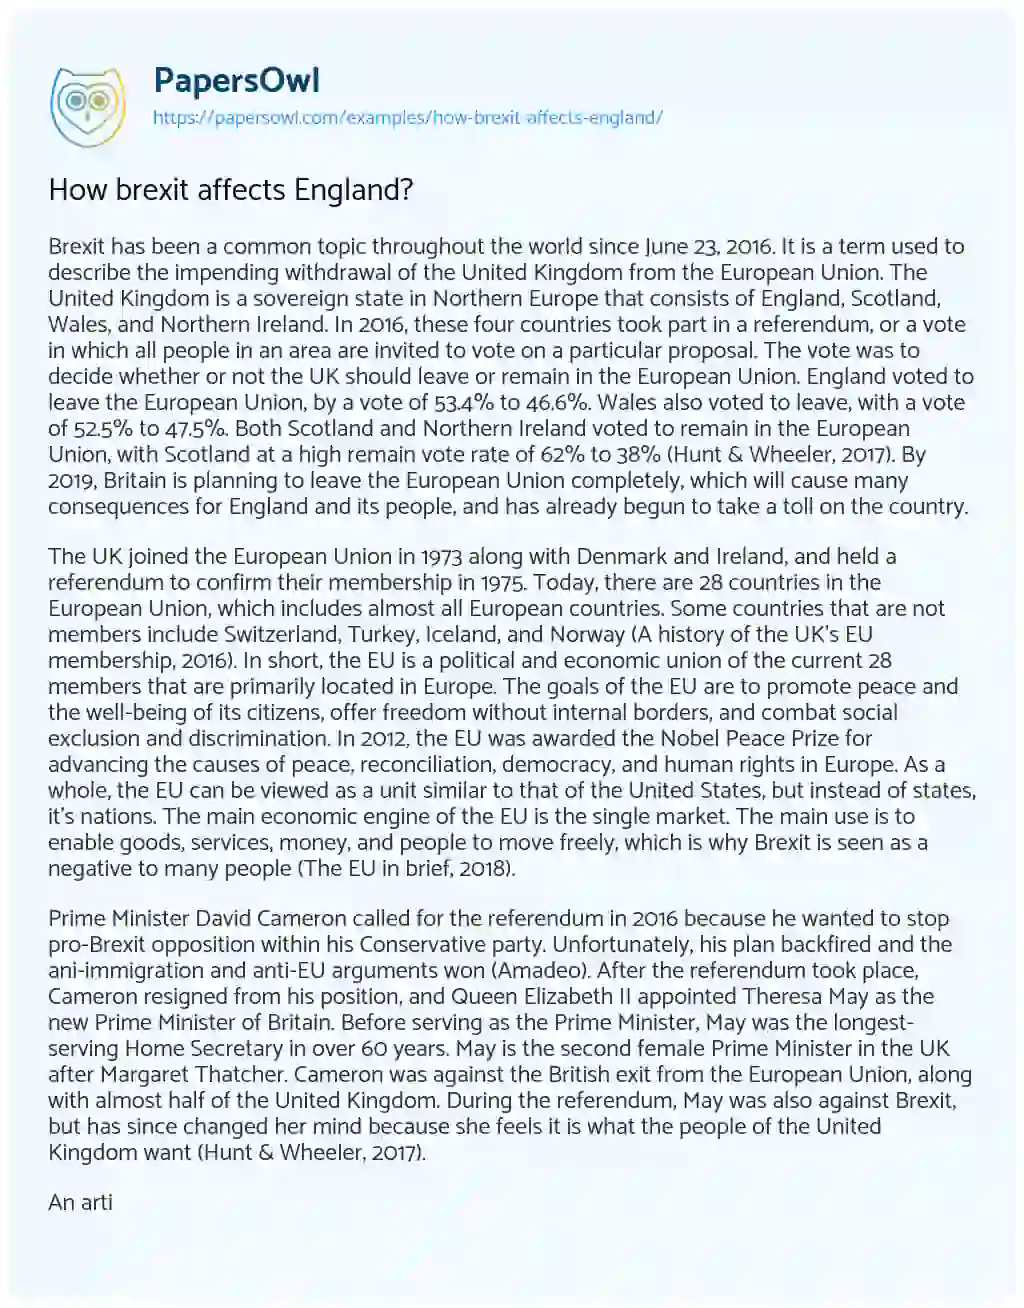 How Brexit Affects England? essay